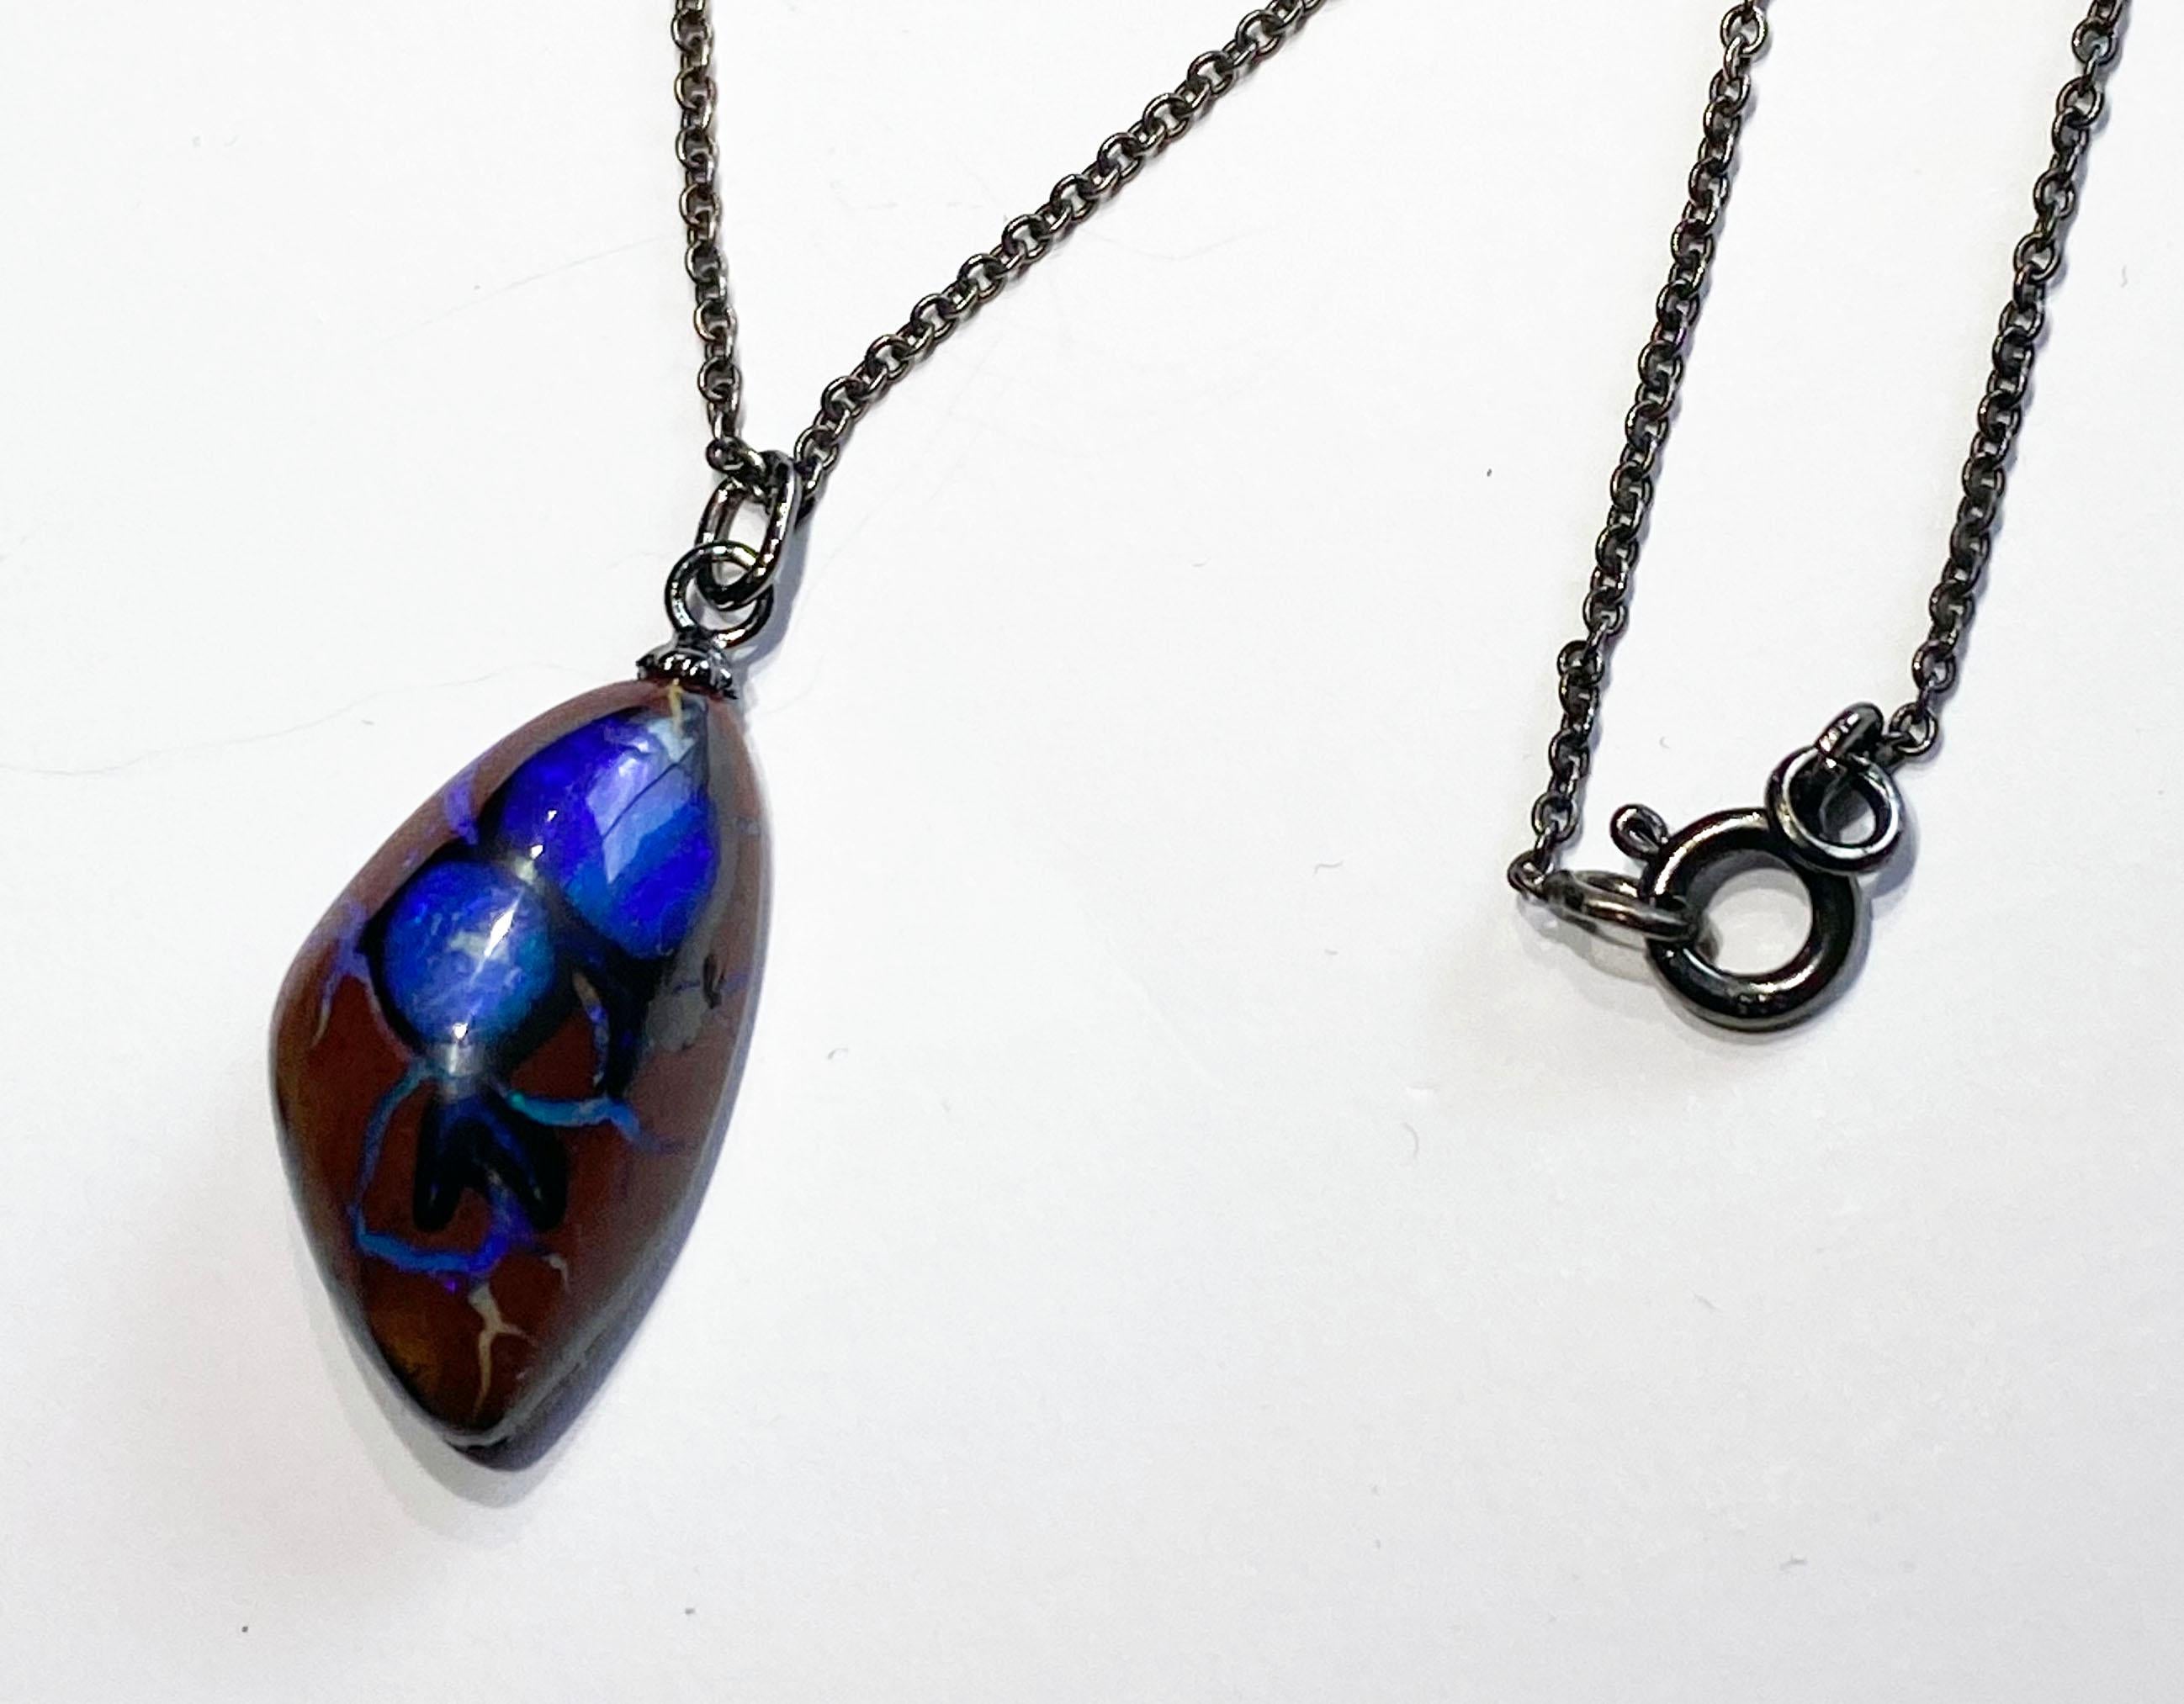 Cabochon Boulder Opal Pendant on a Blackened Silver Chain For Sale